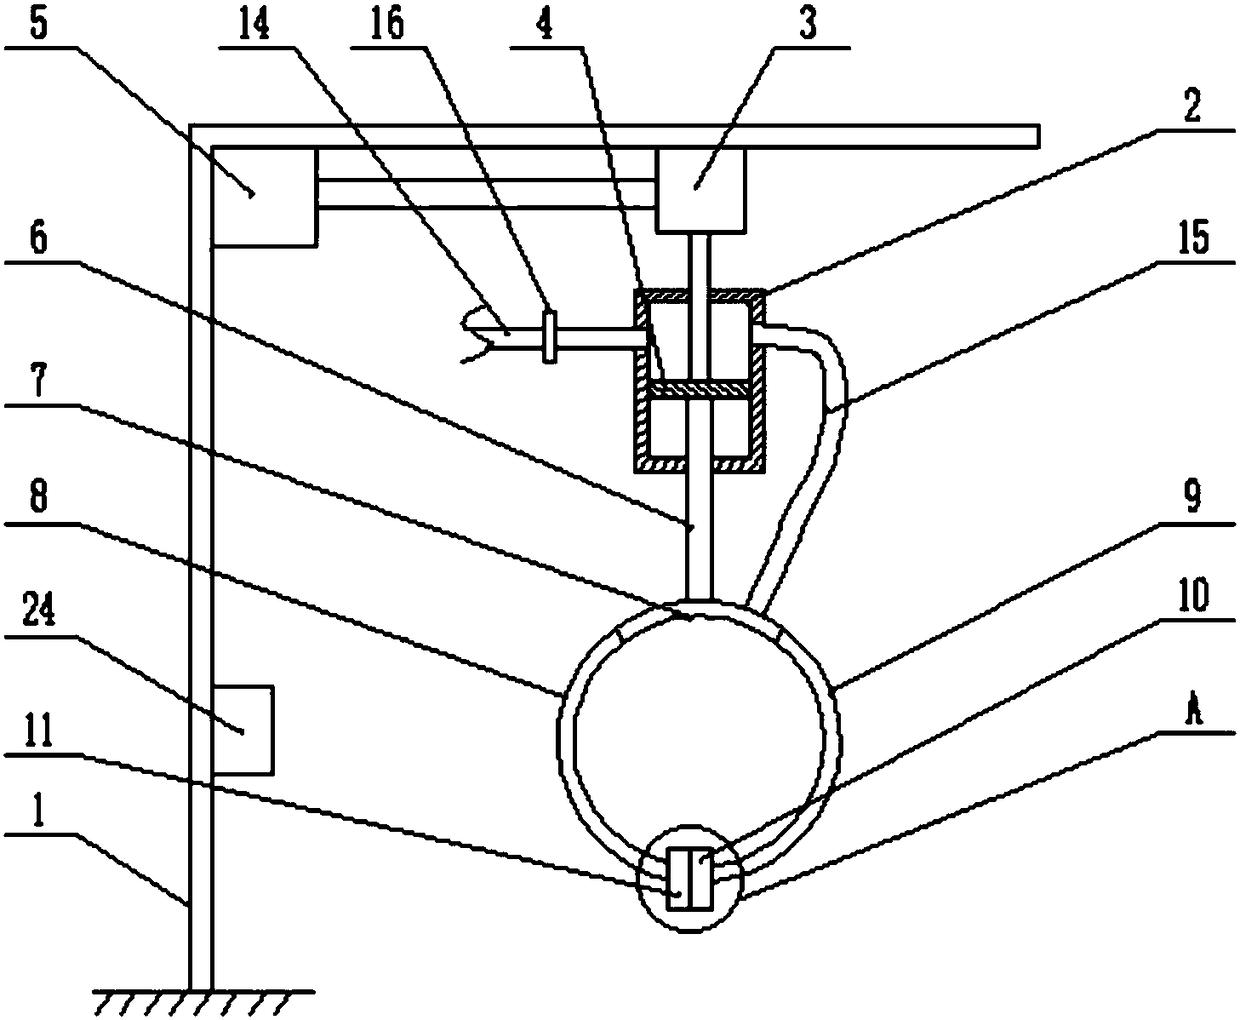 Integrated lotus root harvesting and digging device